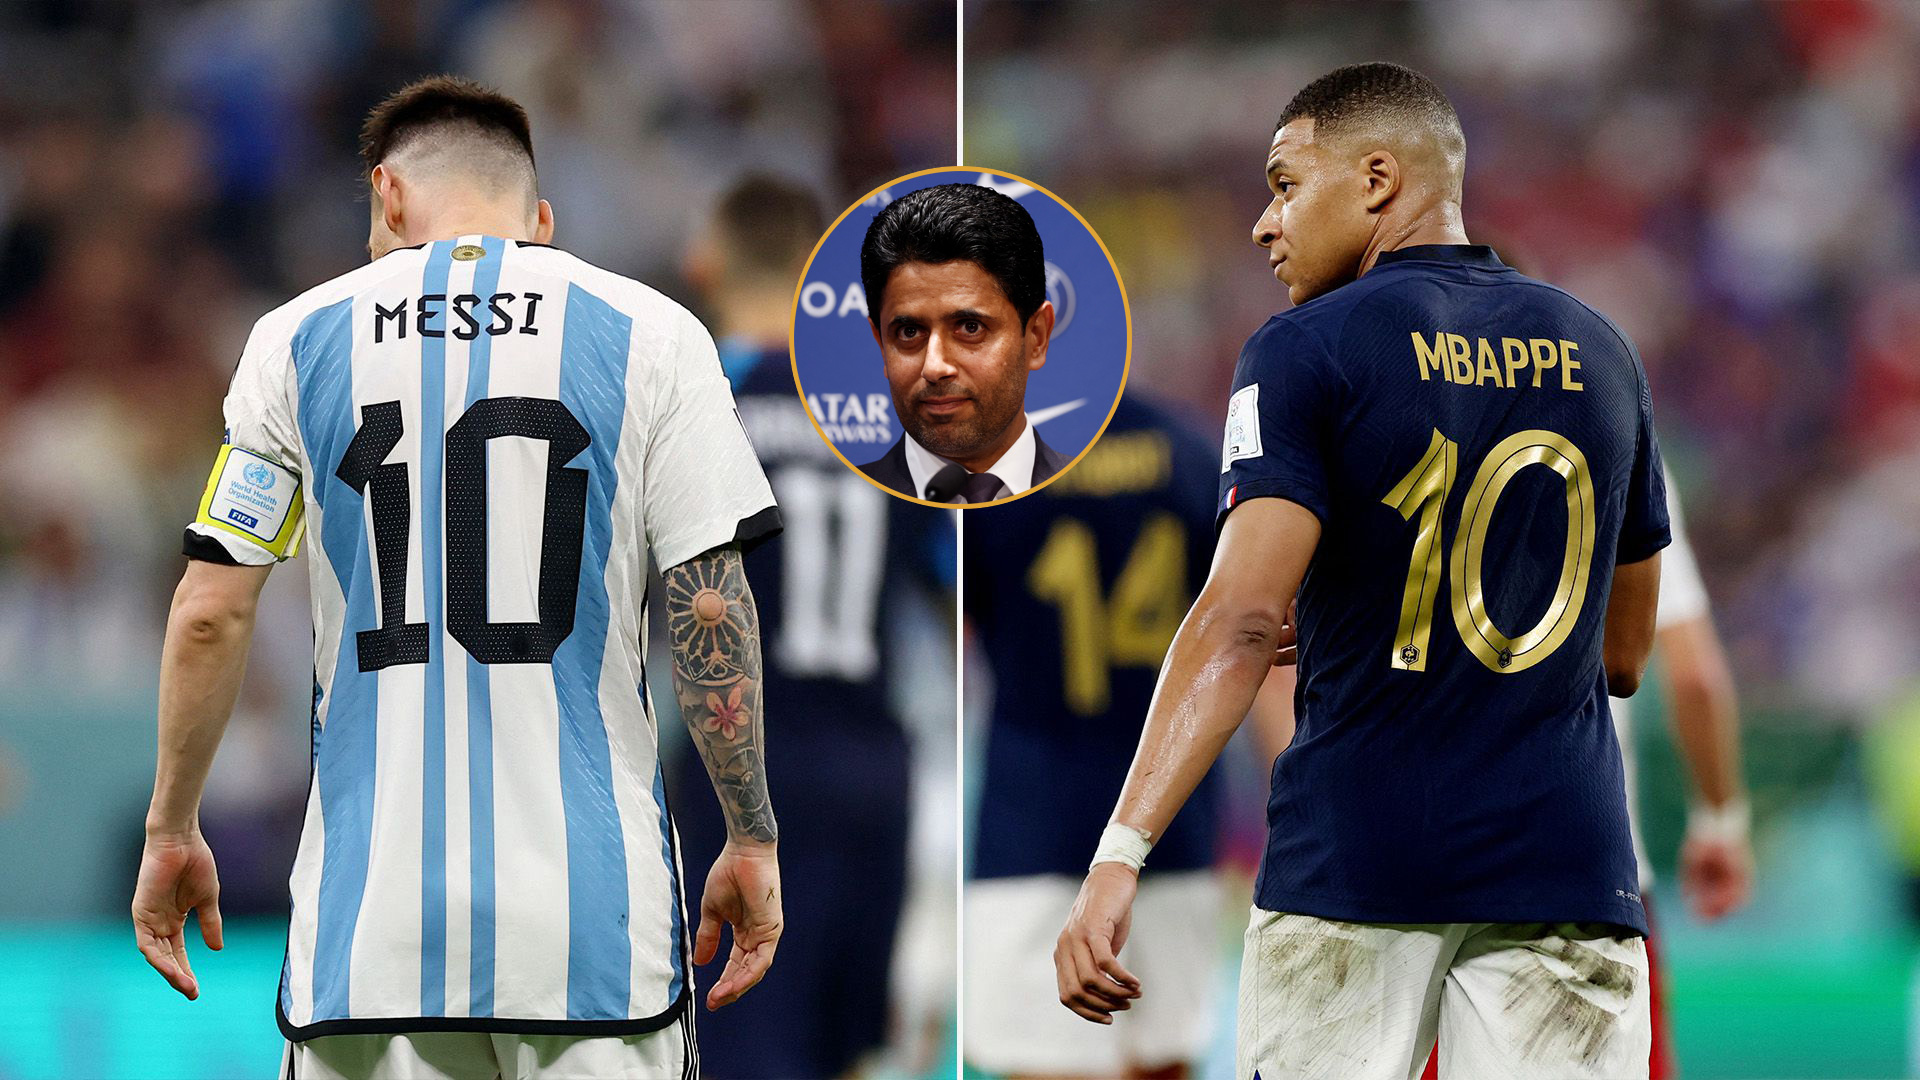 Messi or Mbappé?: The PSG president confessed who he wants to win the World Cup in Qatar